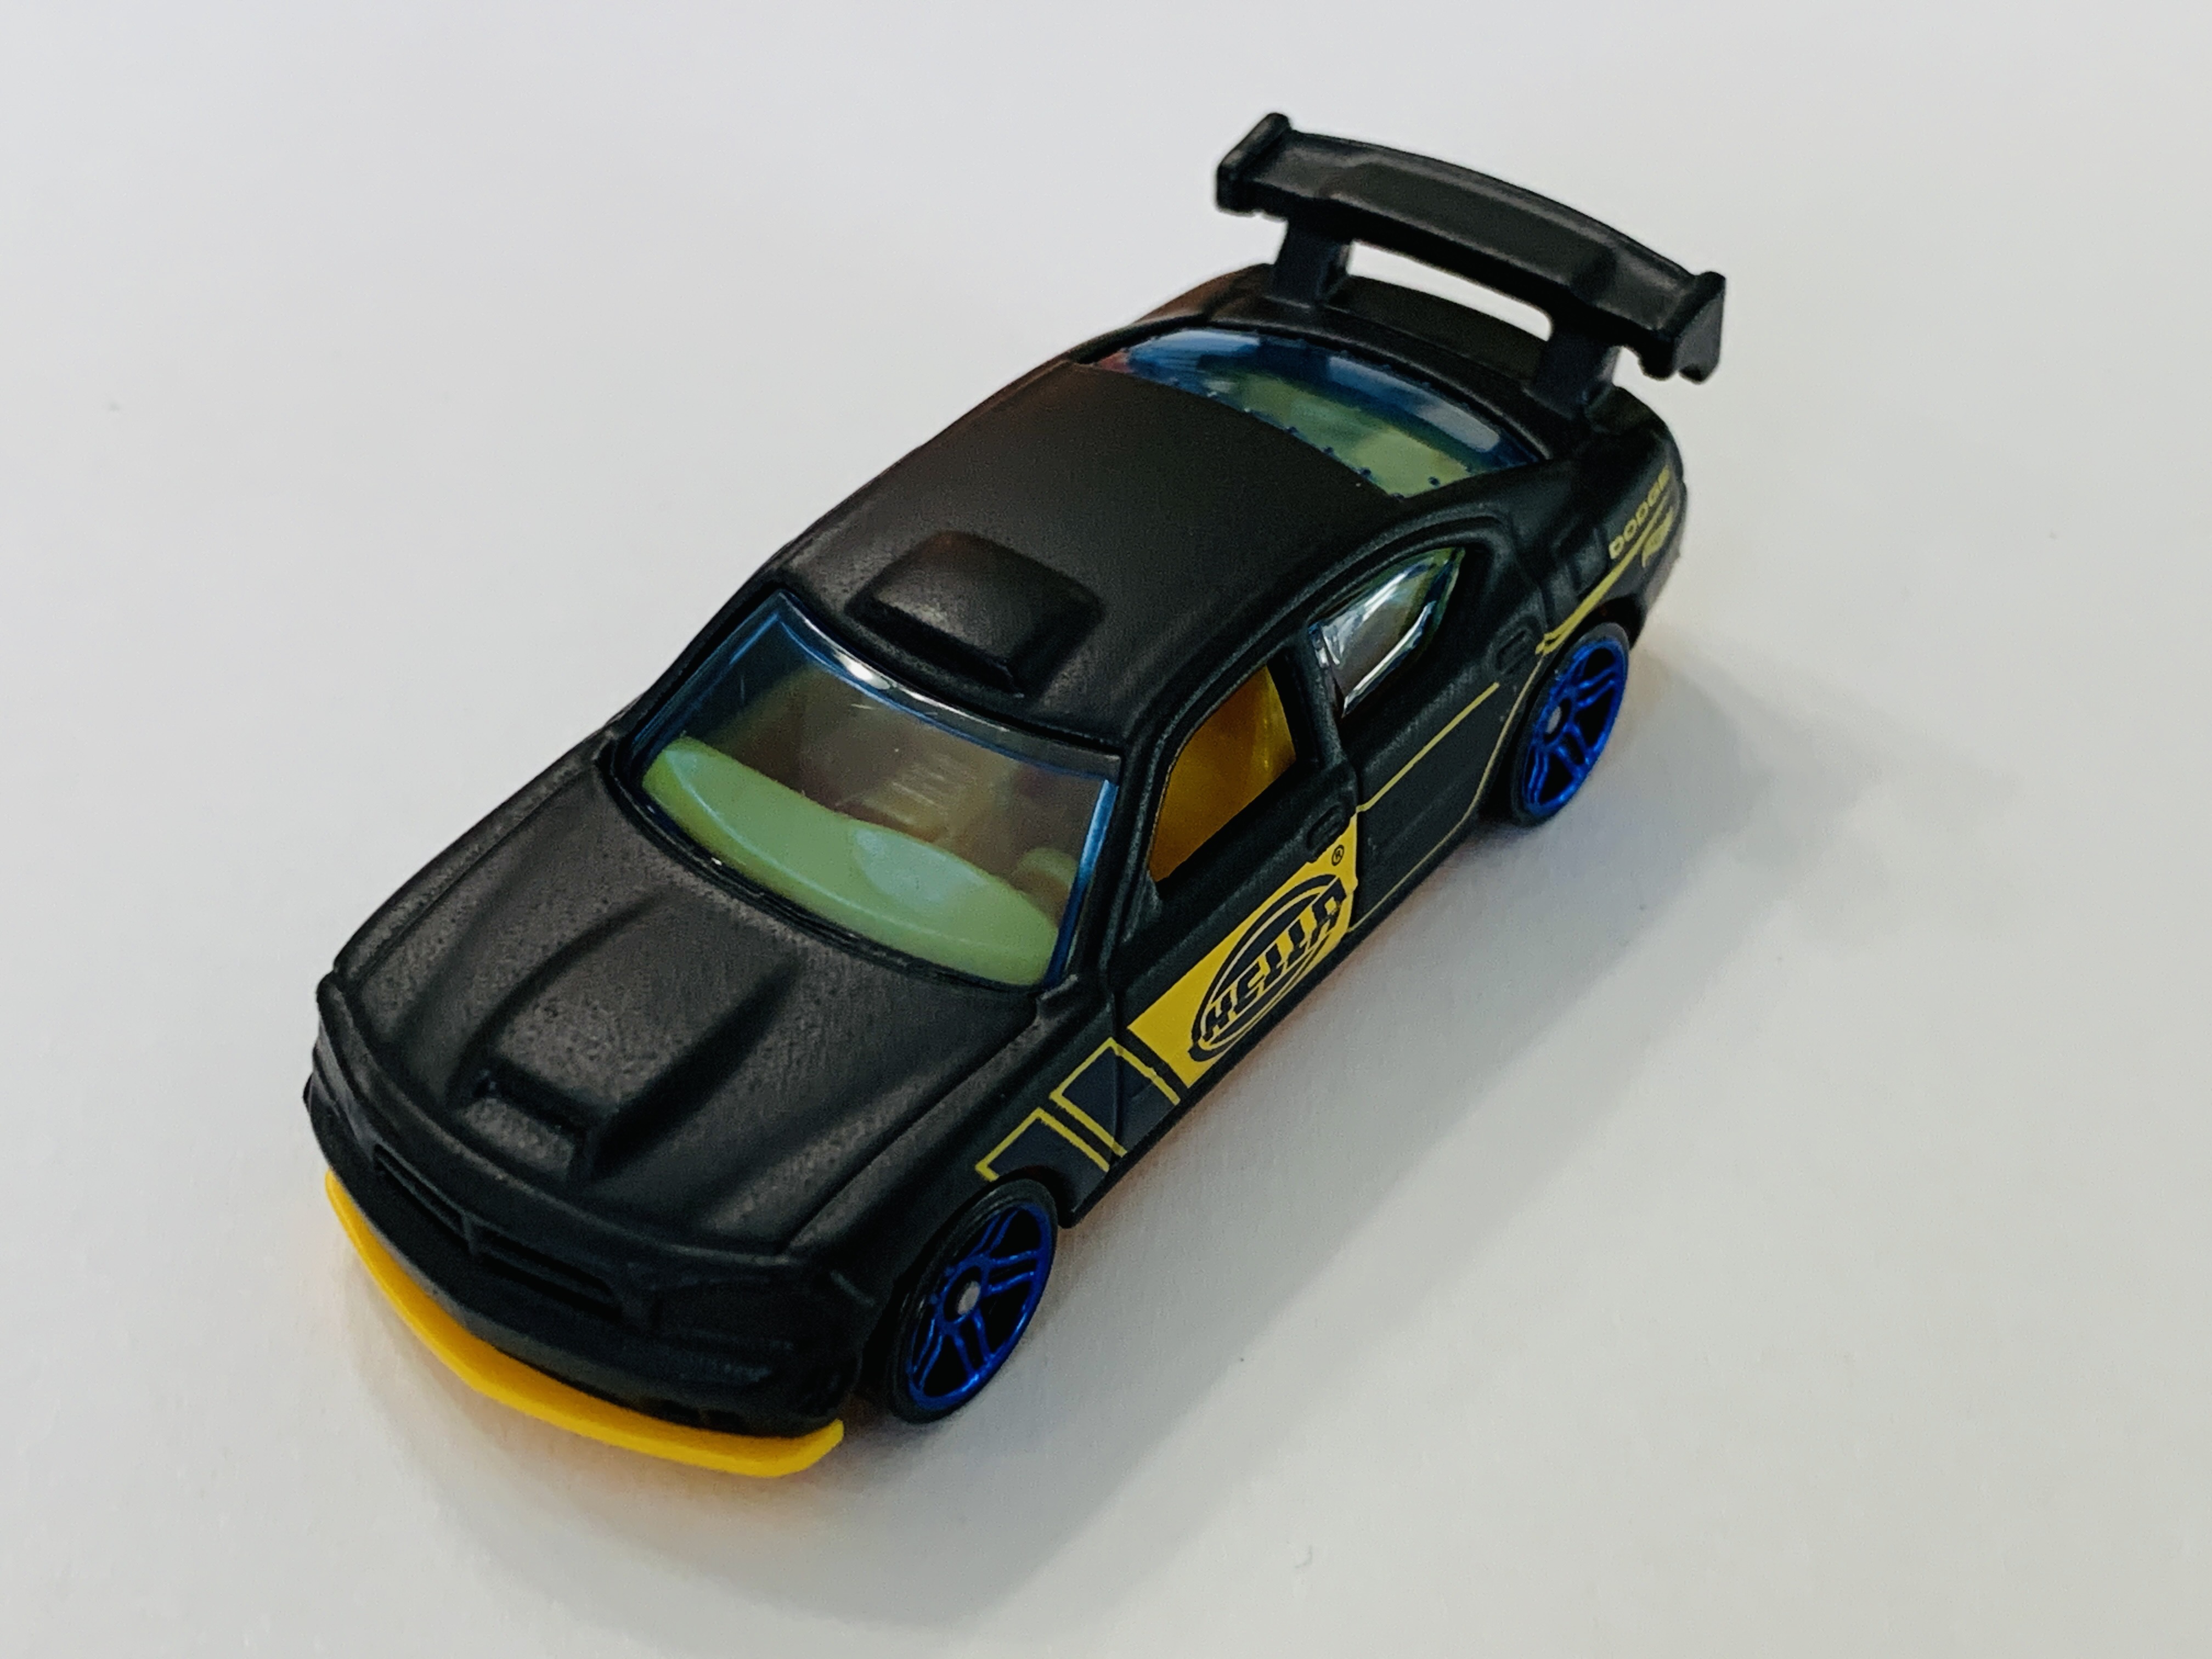 Hot Wheels Dodge Charger Drift - Multipack Exclusive